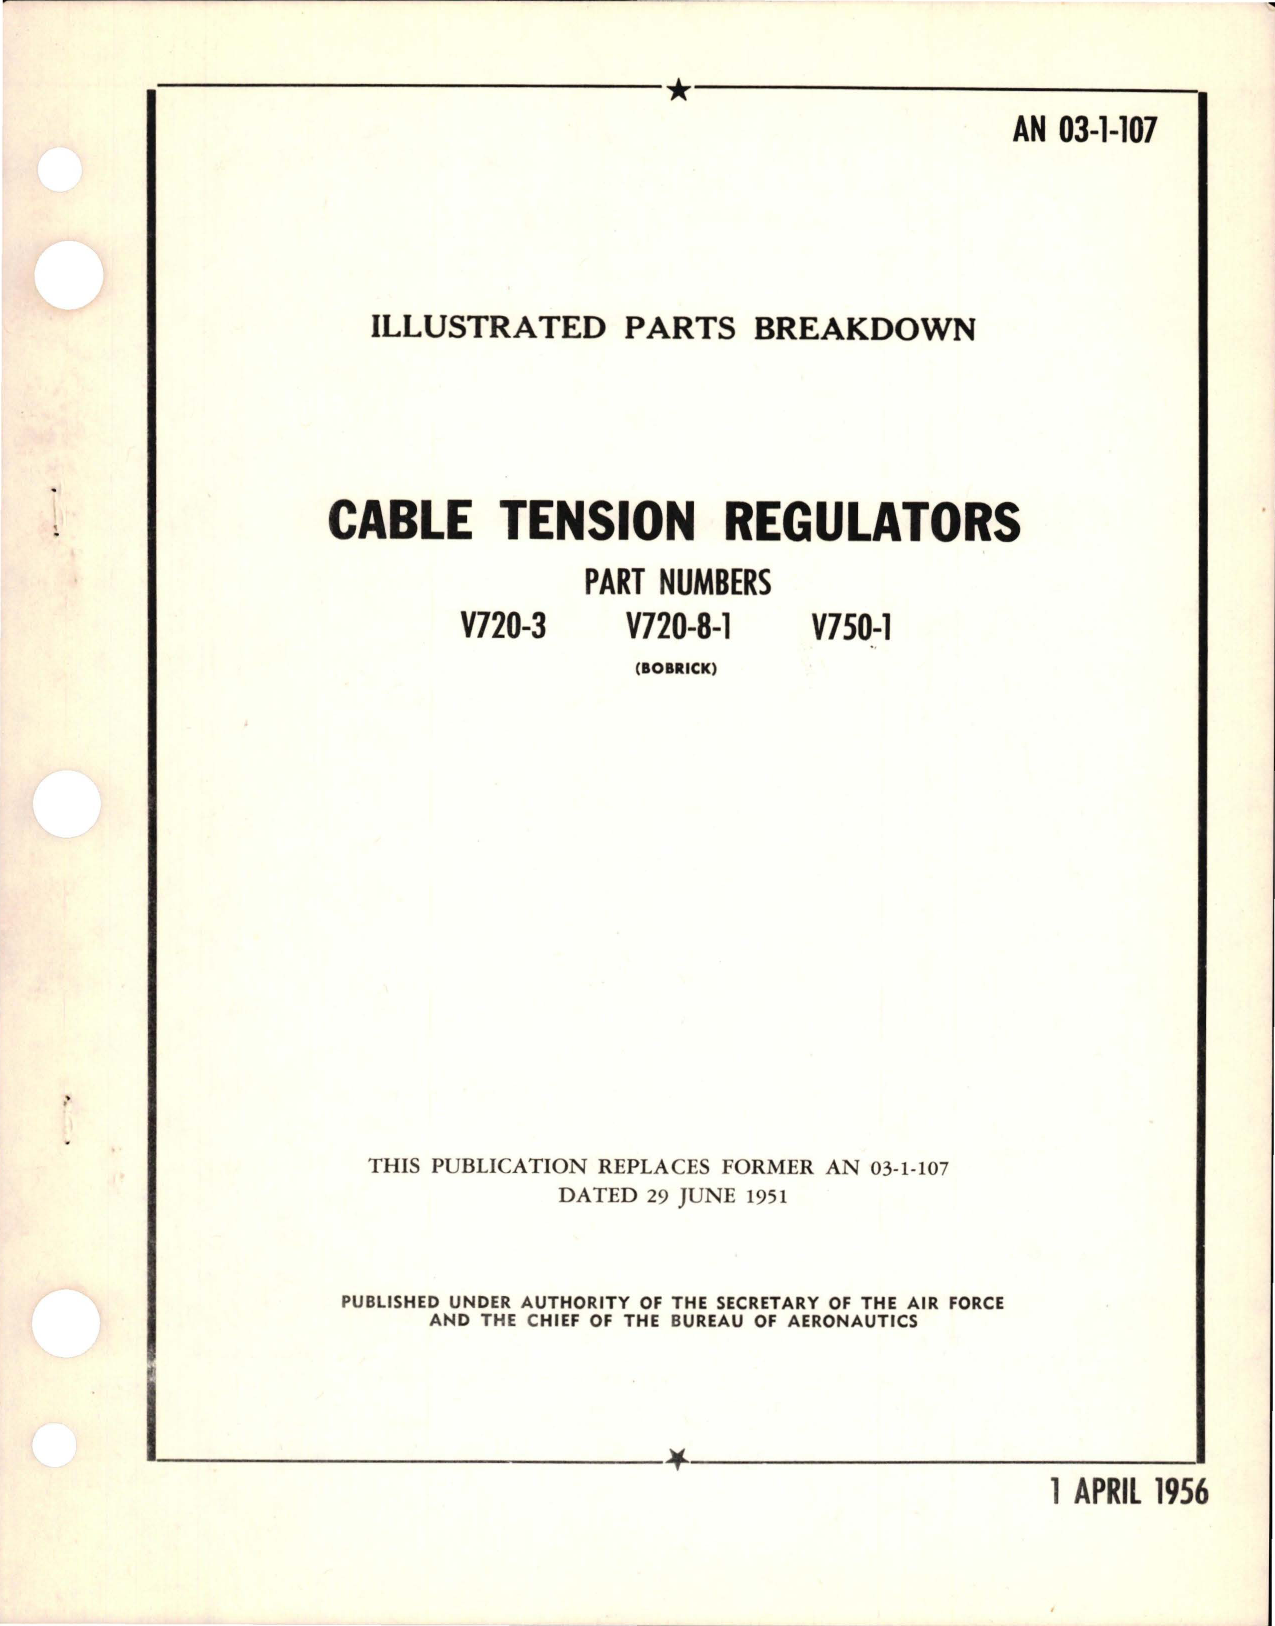 Sample page 1 from AirCorps Library document: Illustrated Parts Breakdown for Cable Tension Regulators - Parts V720-3, V720-8-1, and V750-1